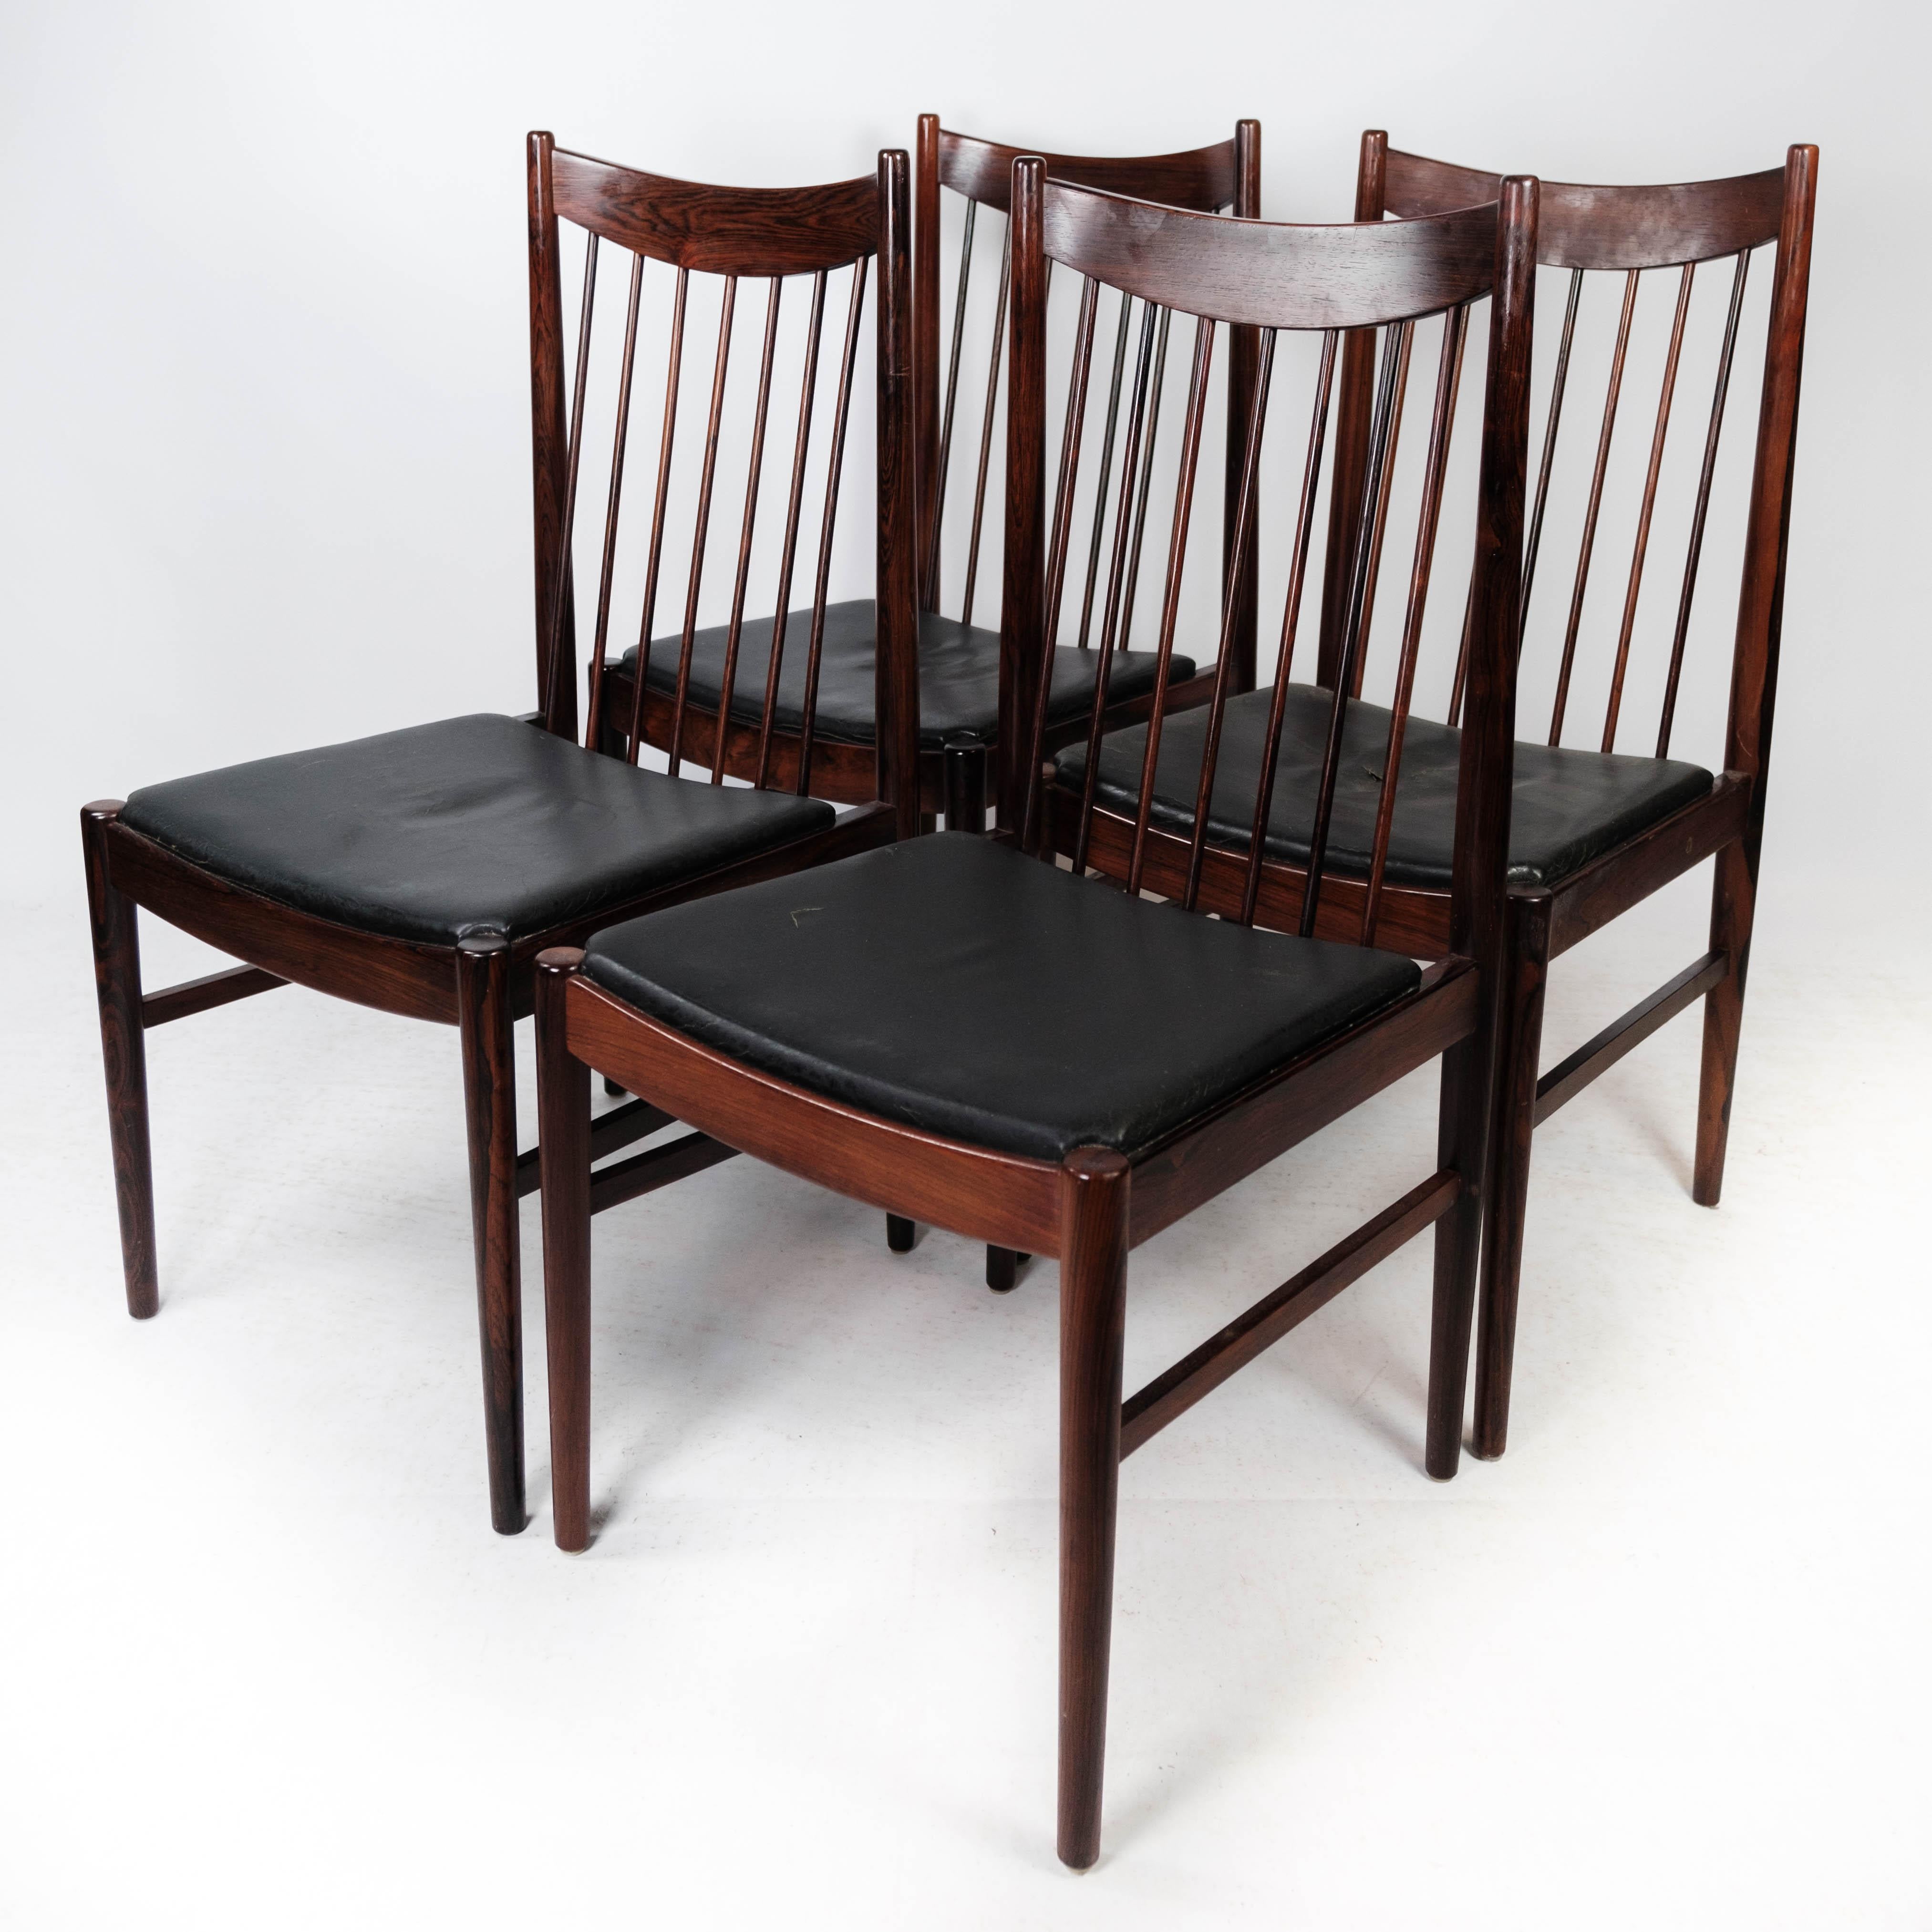 Set of four dining room chairs, model 422, in rosewood and upholstered with black leather designed by Arne Vodder from the 1960s. The chairs are in great vintage condition and we have 6 in total. 